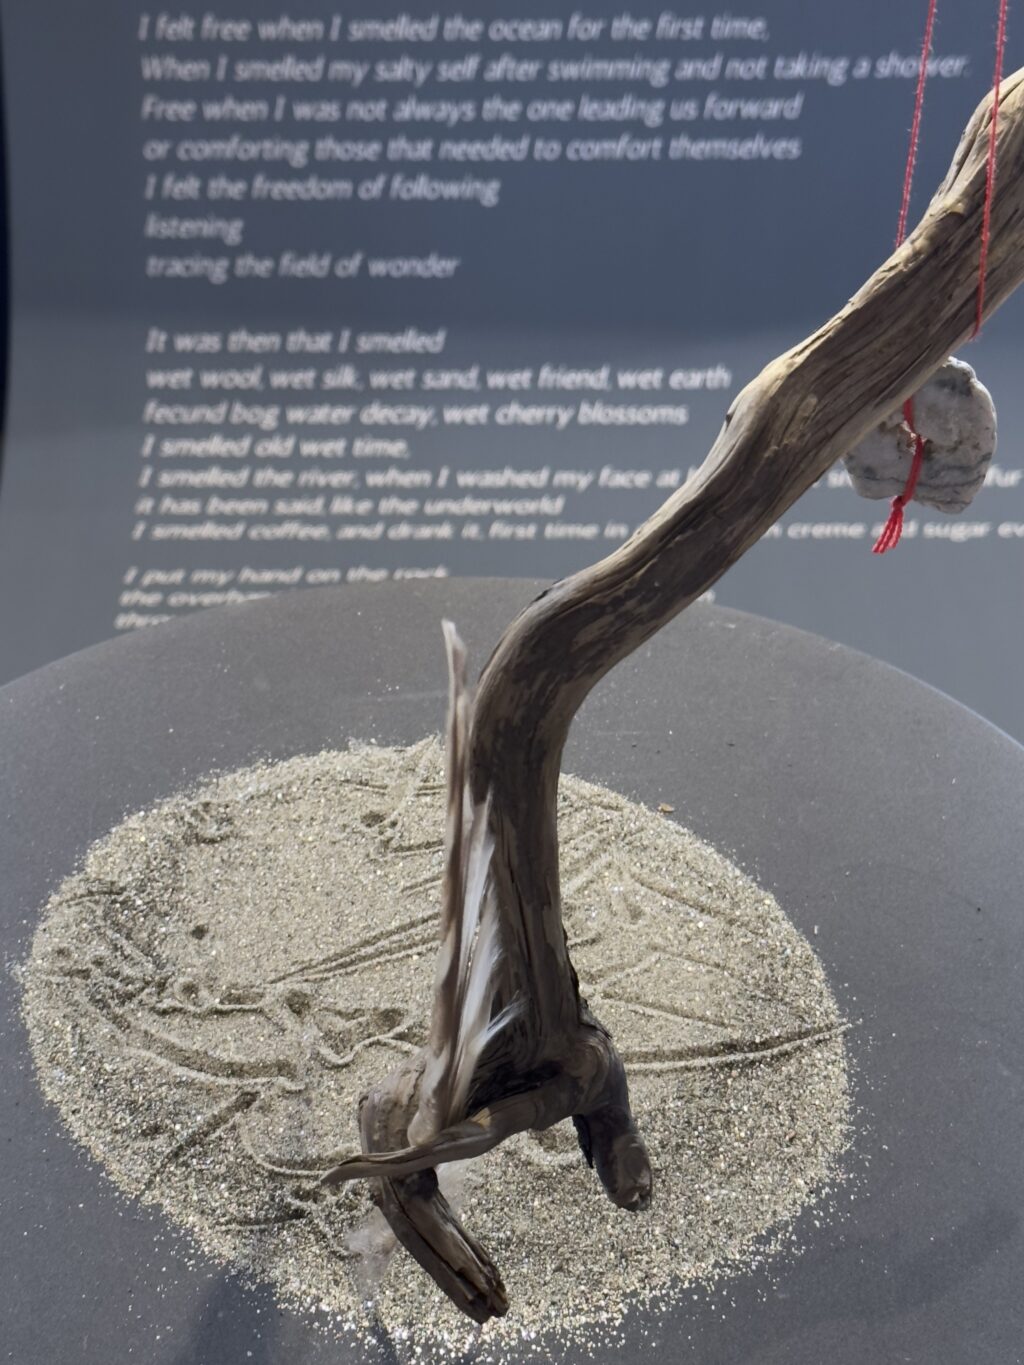 A photograph of a feather attached to a stick pointing down at a pile of glitter and sand with a poem on the wall behind it.